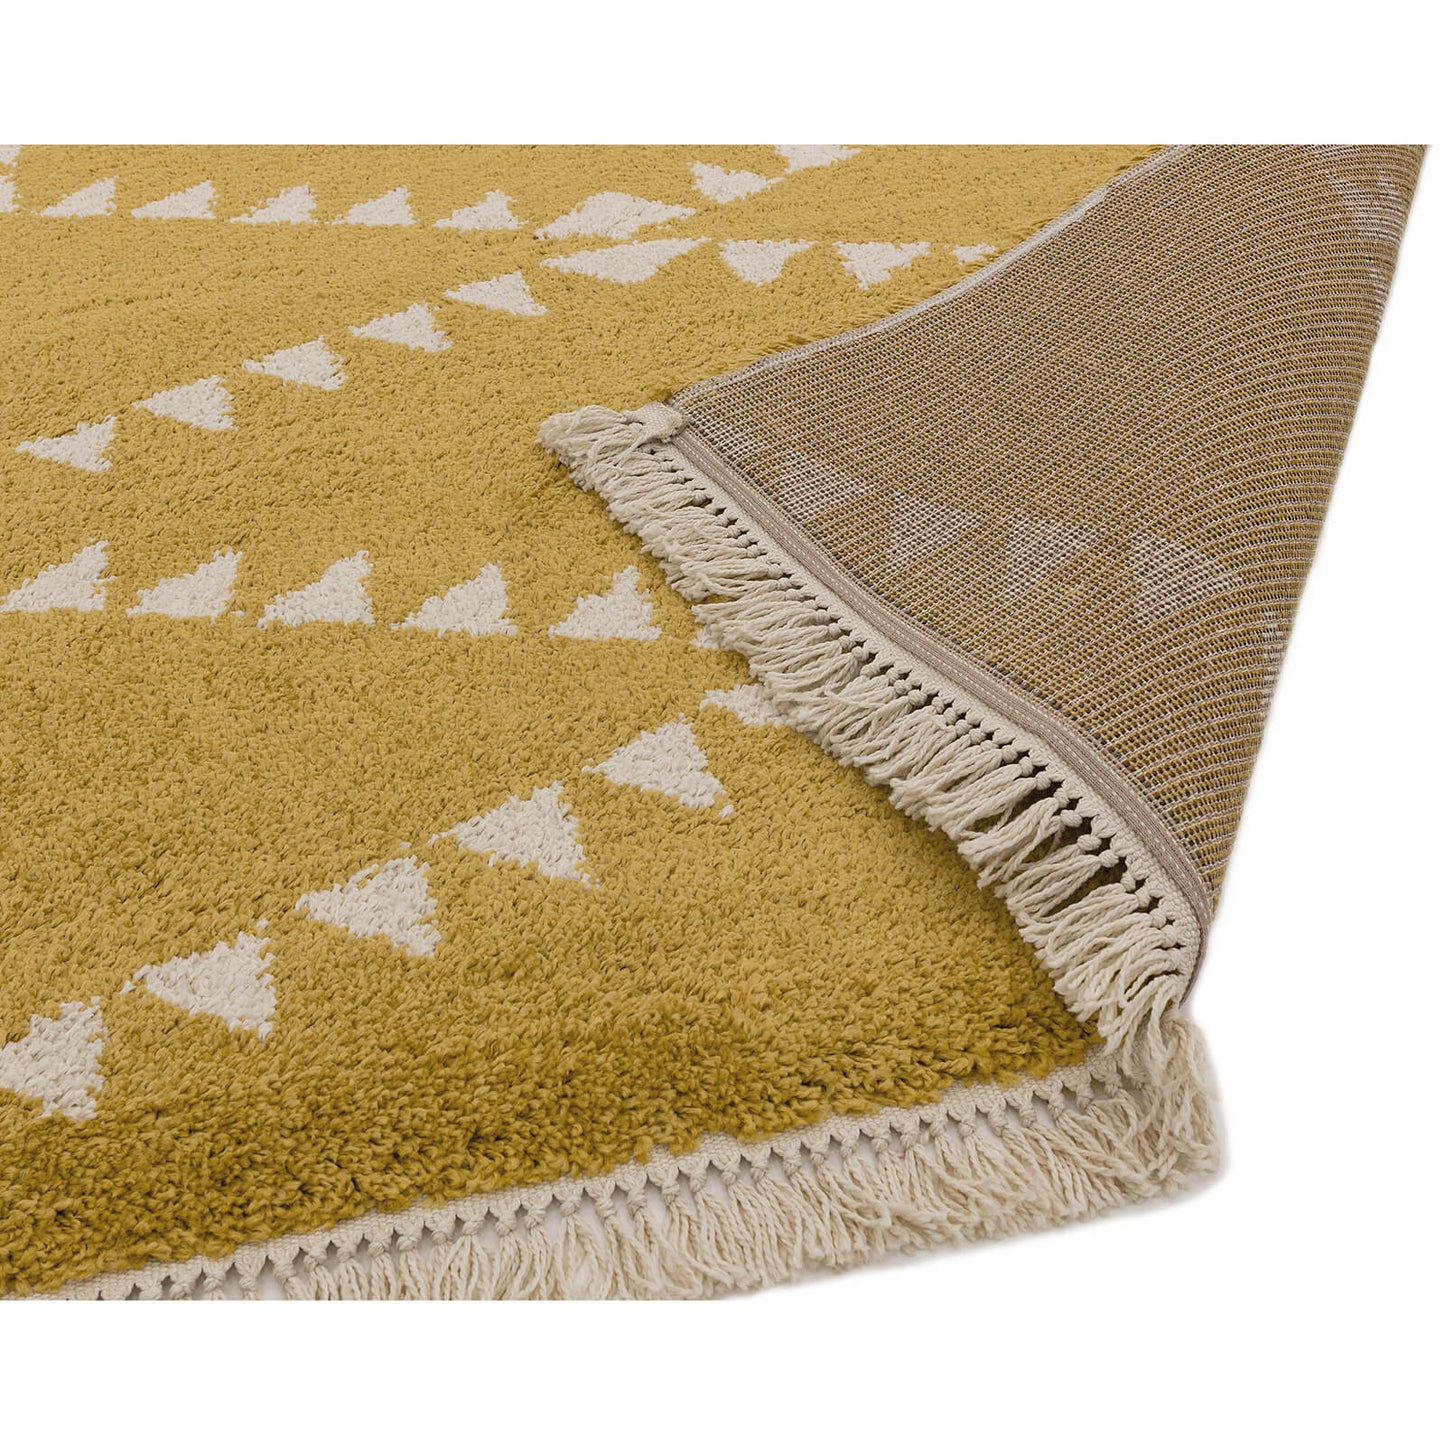 Asiatic Rocco RC05 Mustard Rug